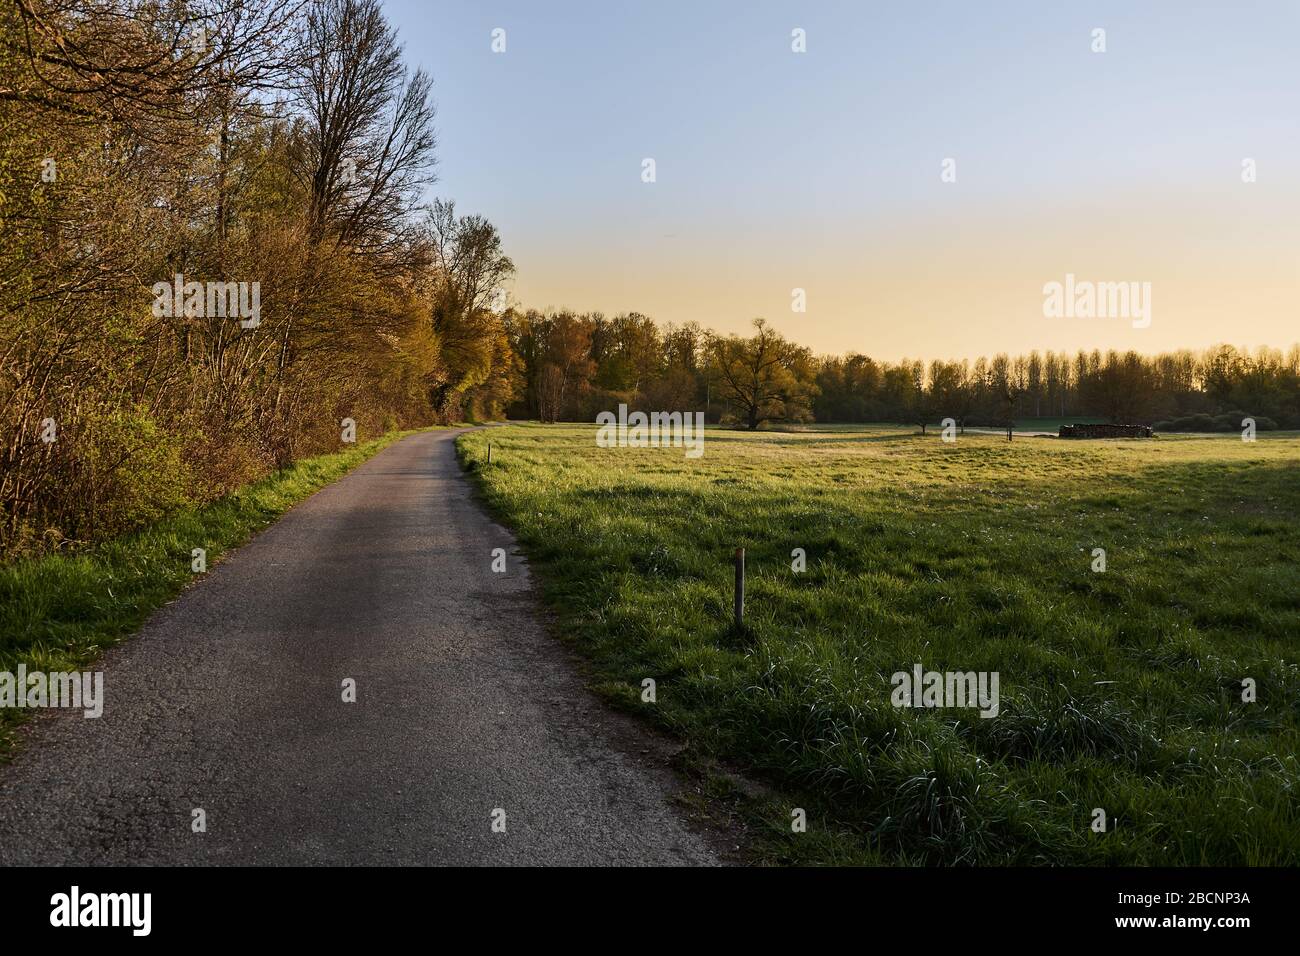 Scenic countryside landscape with grass, trees and a rural asphalt footpath during sunset Stock Photo